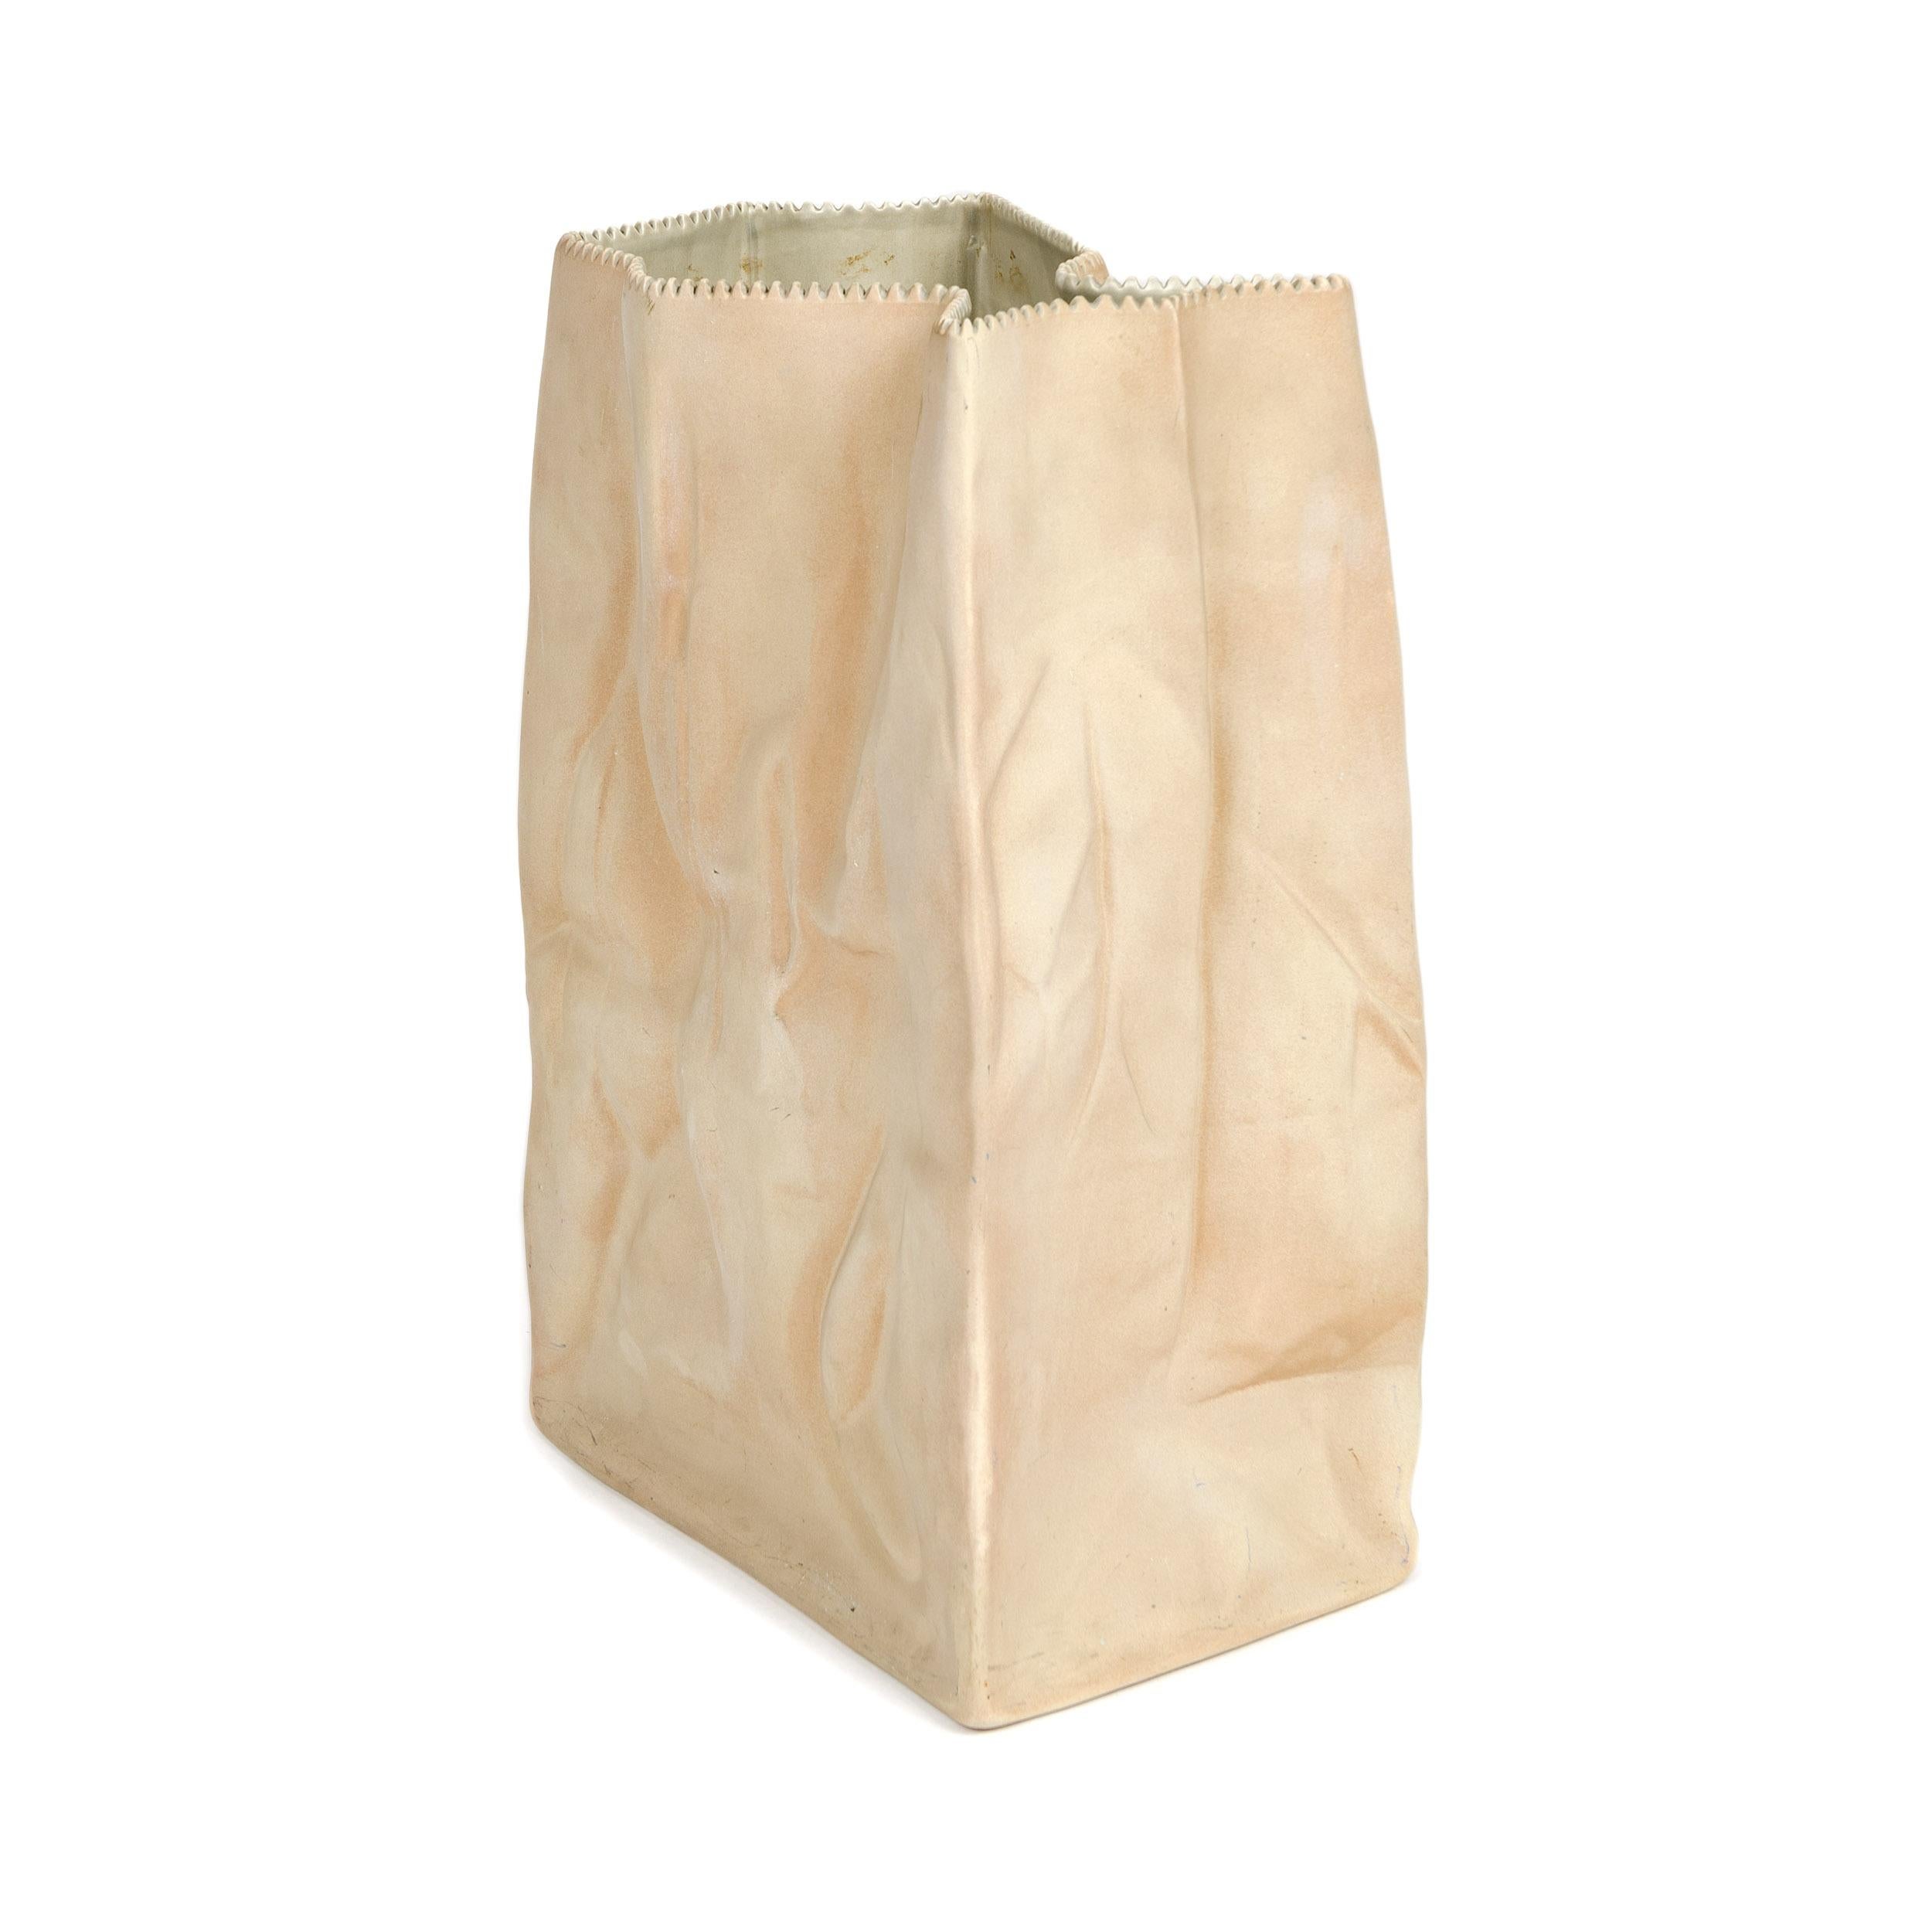 Paper or plastic or…Wirkkala’s fun and whimsical 1977 Pop Art take on tromp l’oeil, something that is not what it appears to be. Here, a used paper bag is actually a porcelain vase. Kraft paper brown with a serrated top edge, this bag vase is the